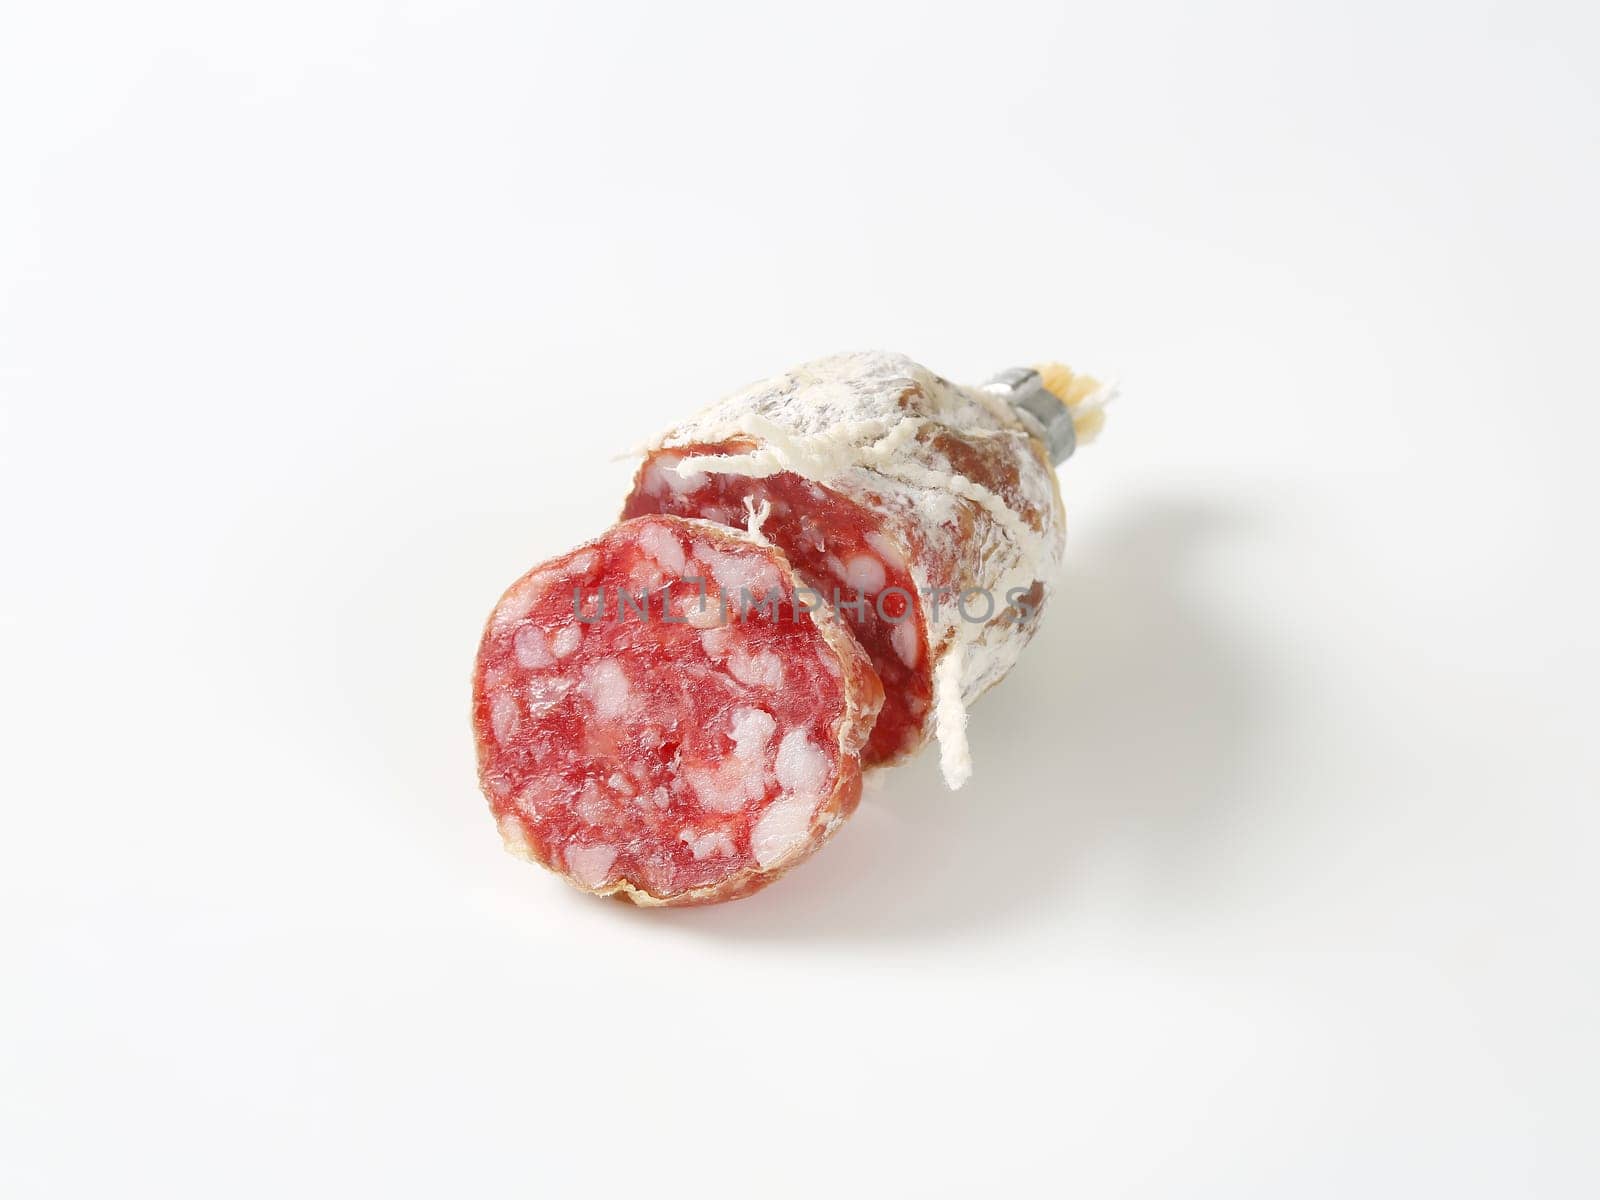 Piece of  dry cured French sausage